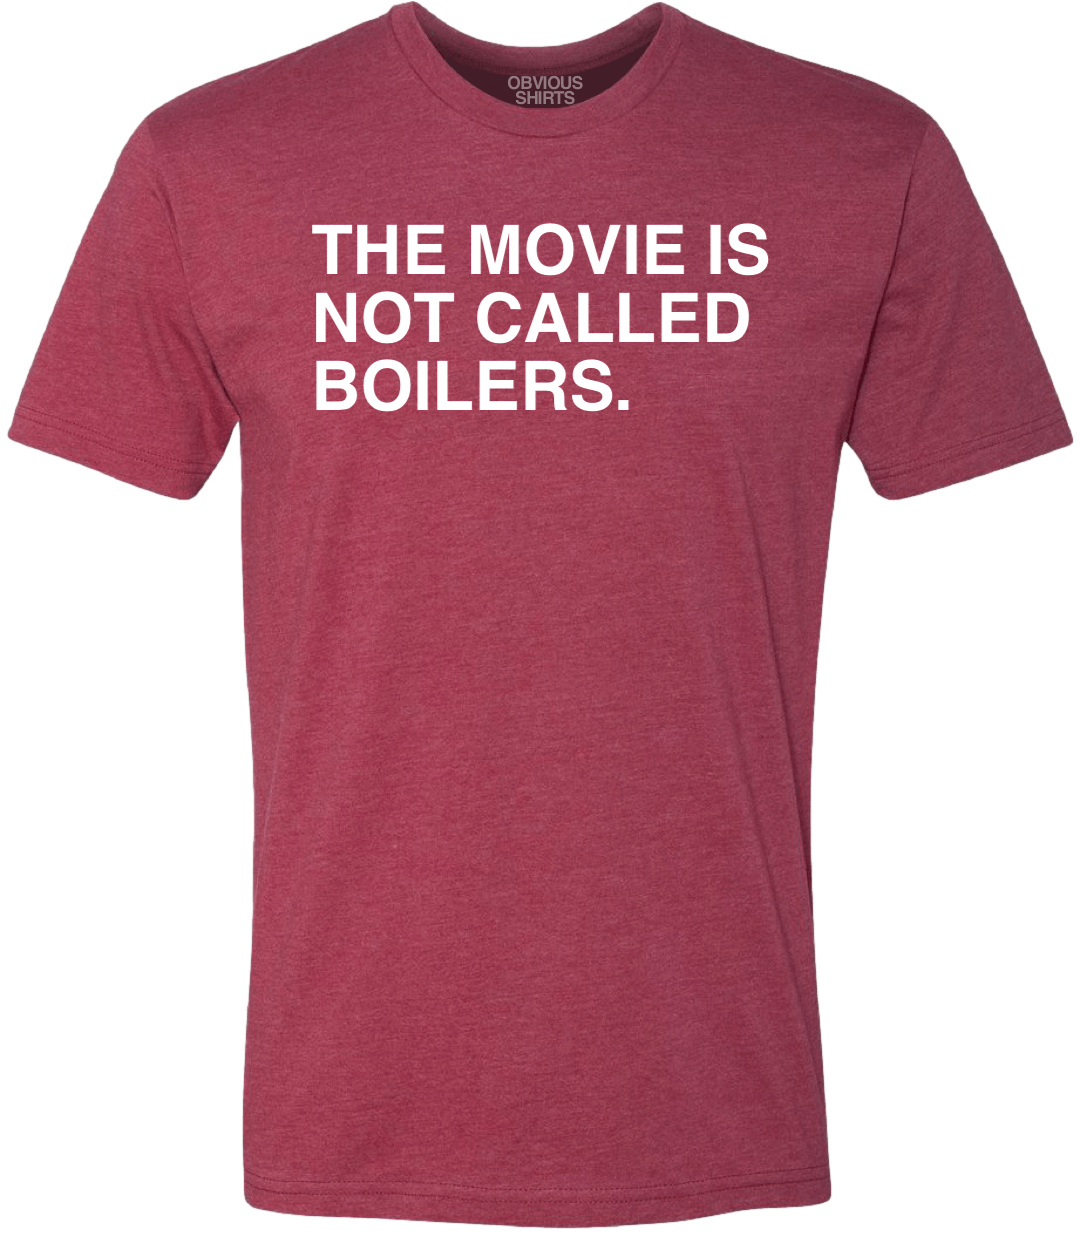 THE MOVIE IS NOT CALLED BOILERS. - OBVIOUS SHIRTS